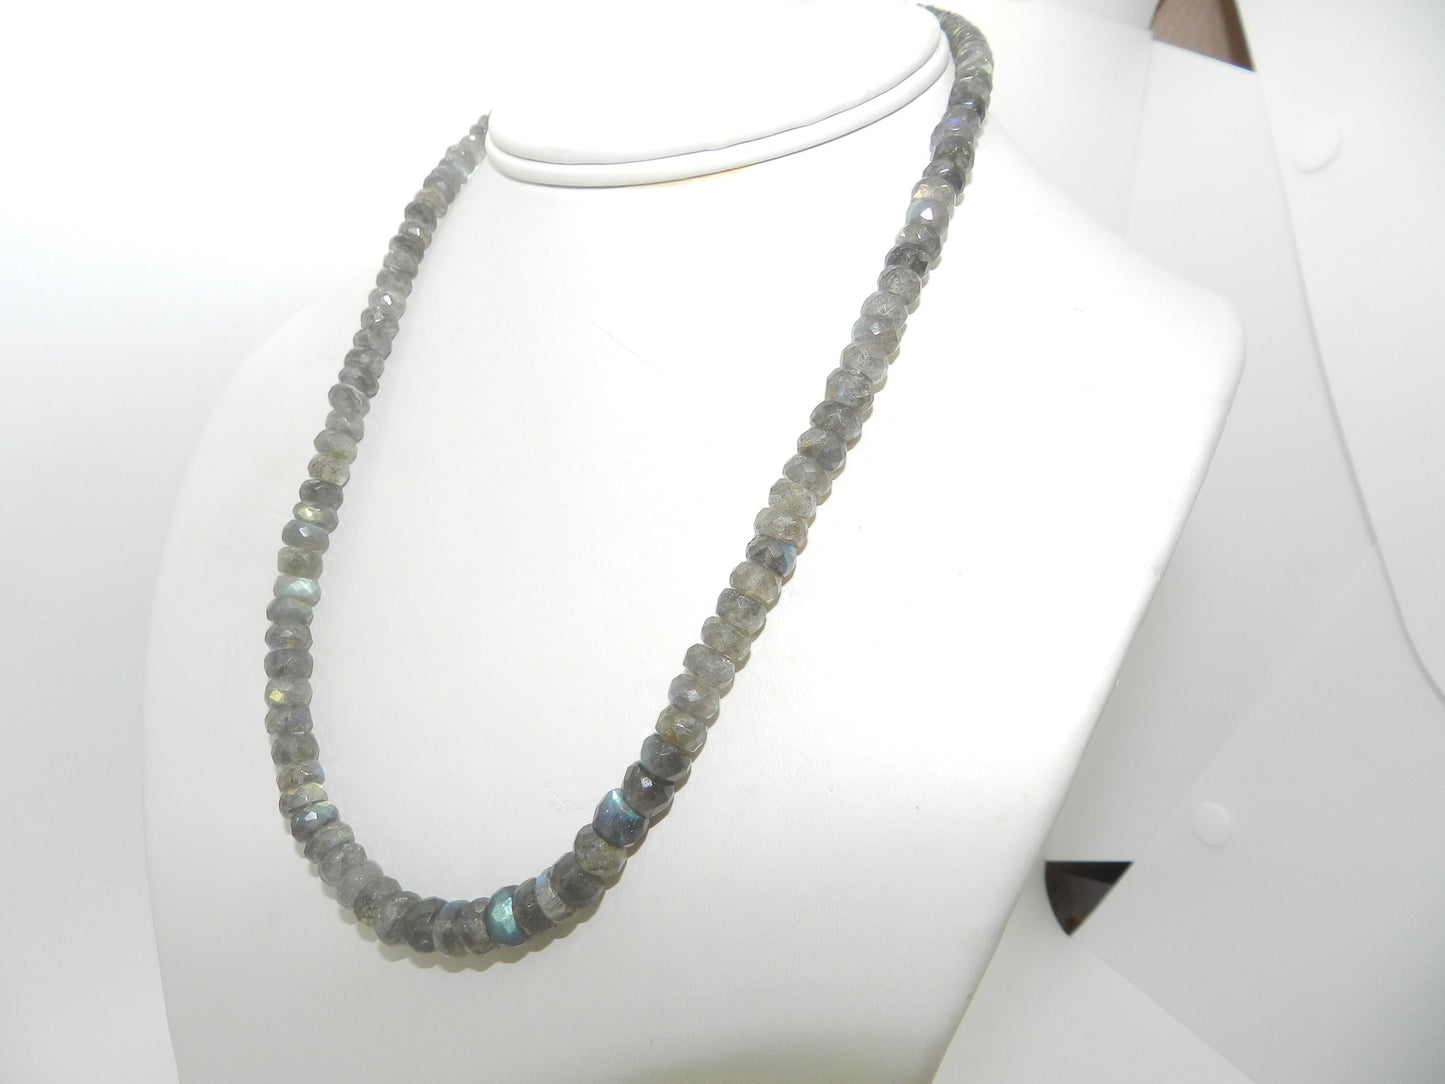 18" Authentic Labradorite Necklace Sterling Clasp